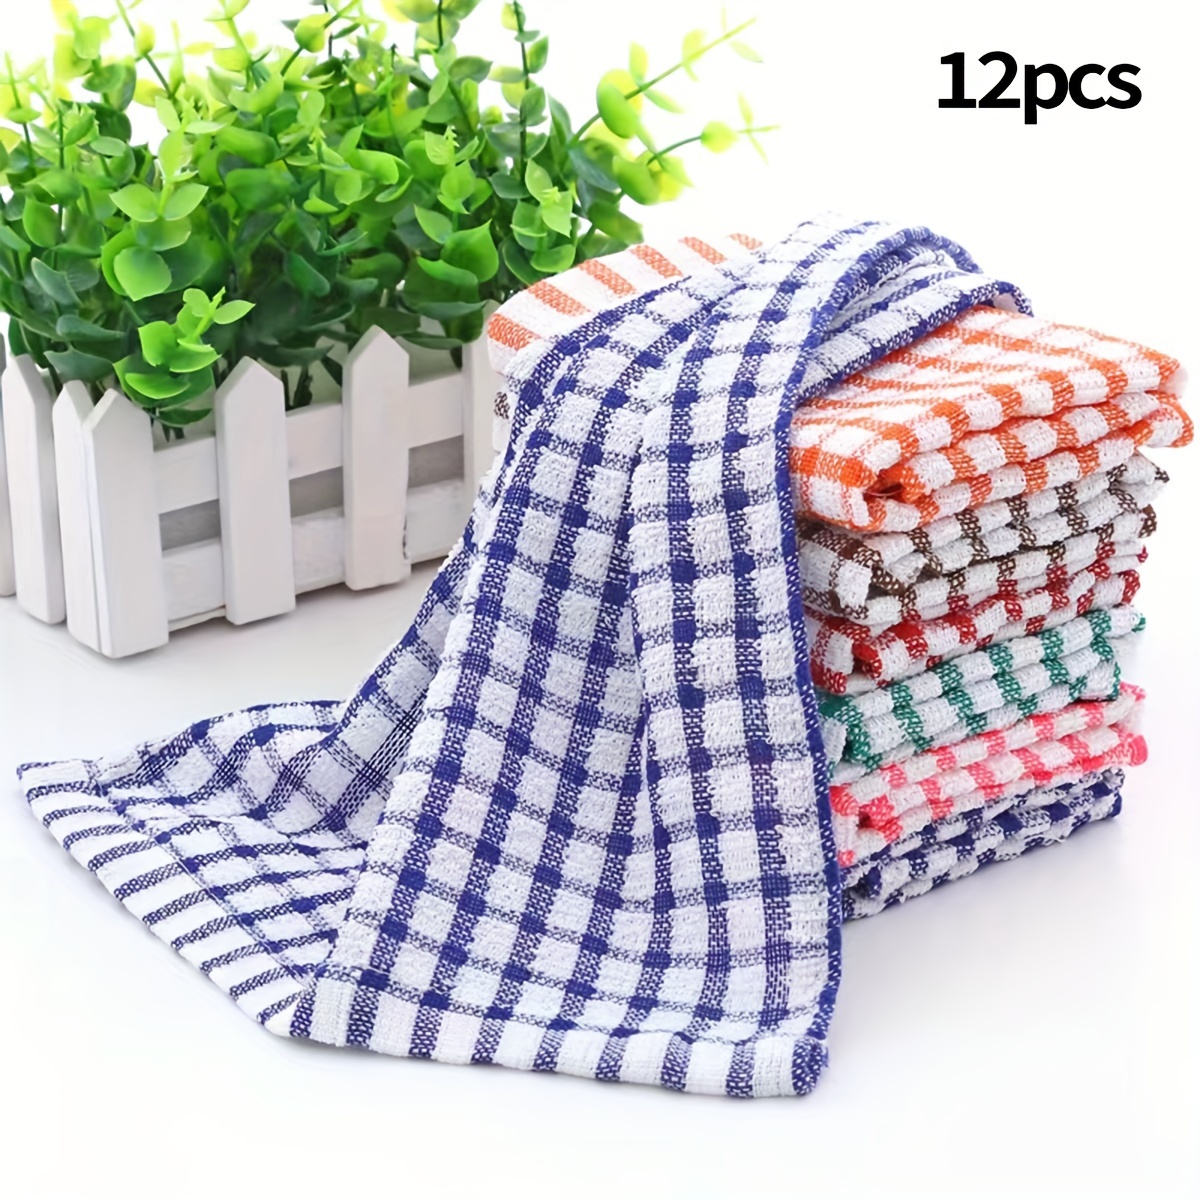 

12-pack Cotton Dish Cloths, Contemporary Style, Lightweight Oblong Kitchen Cleaning Towels, Hand Wash Only, Woven Weaving Method, Space Theme, Reusable Dish Towels.